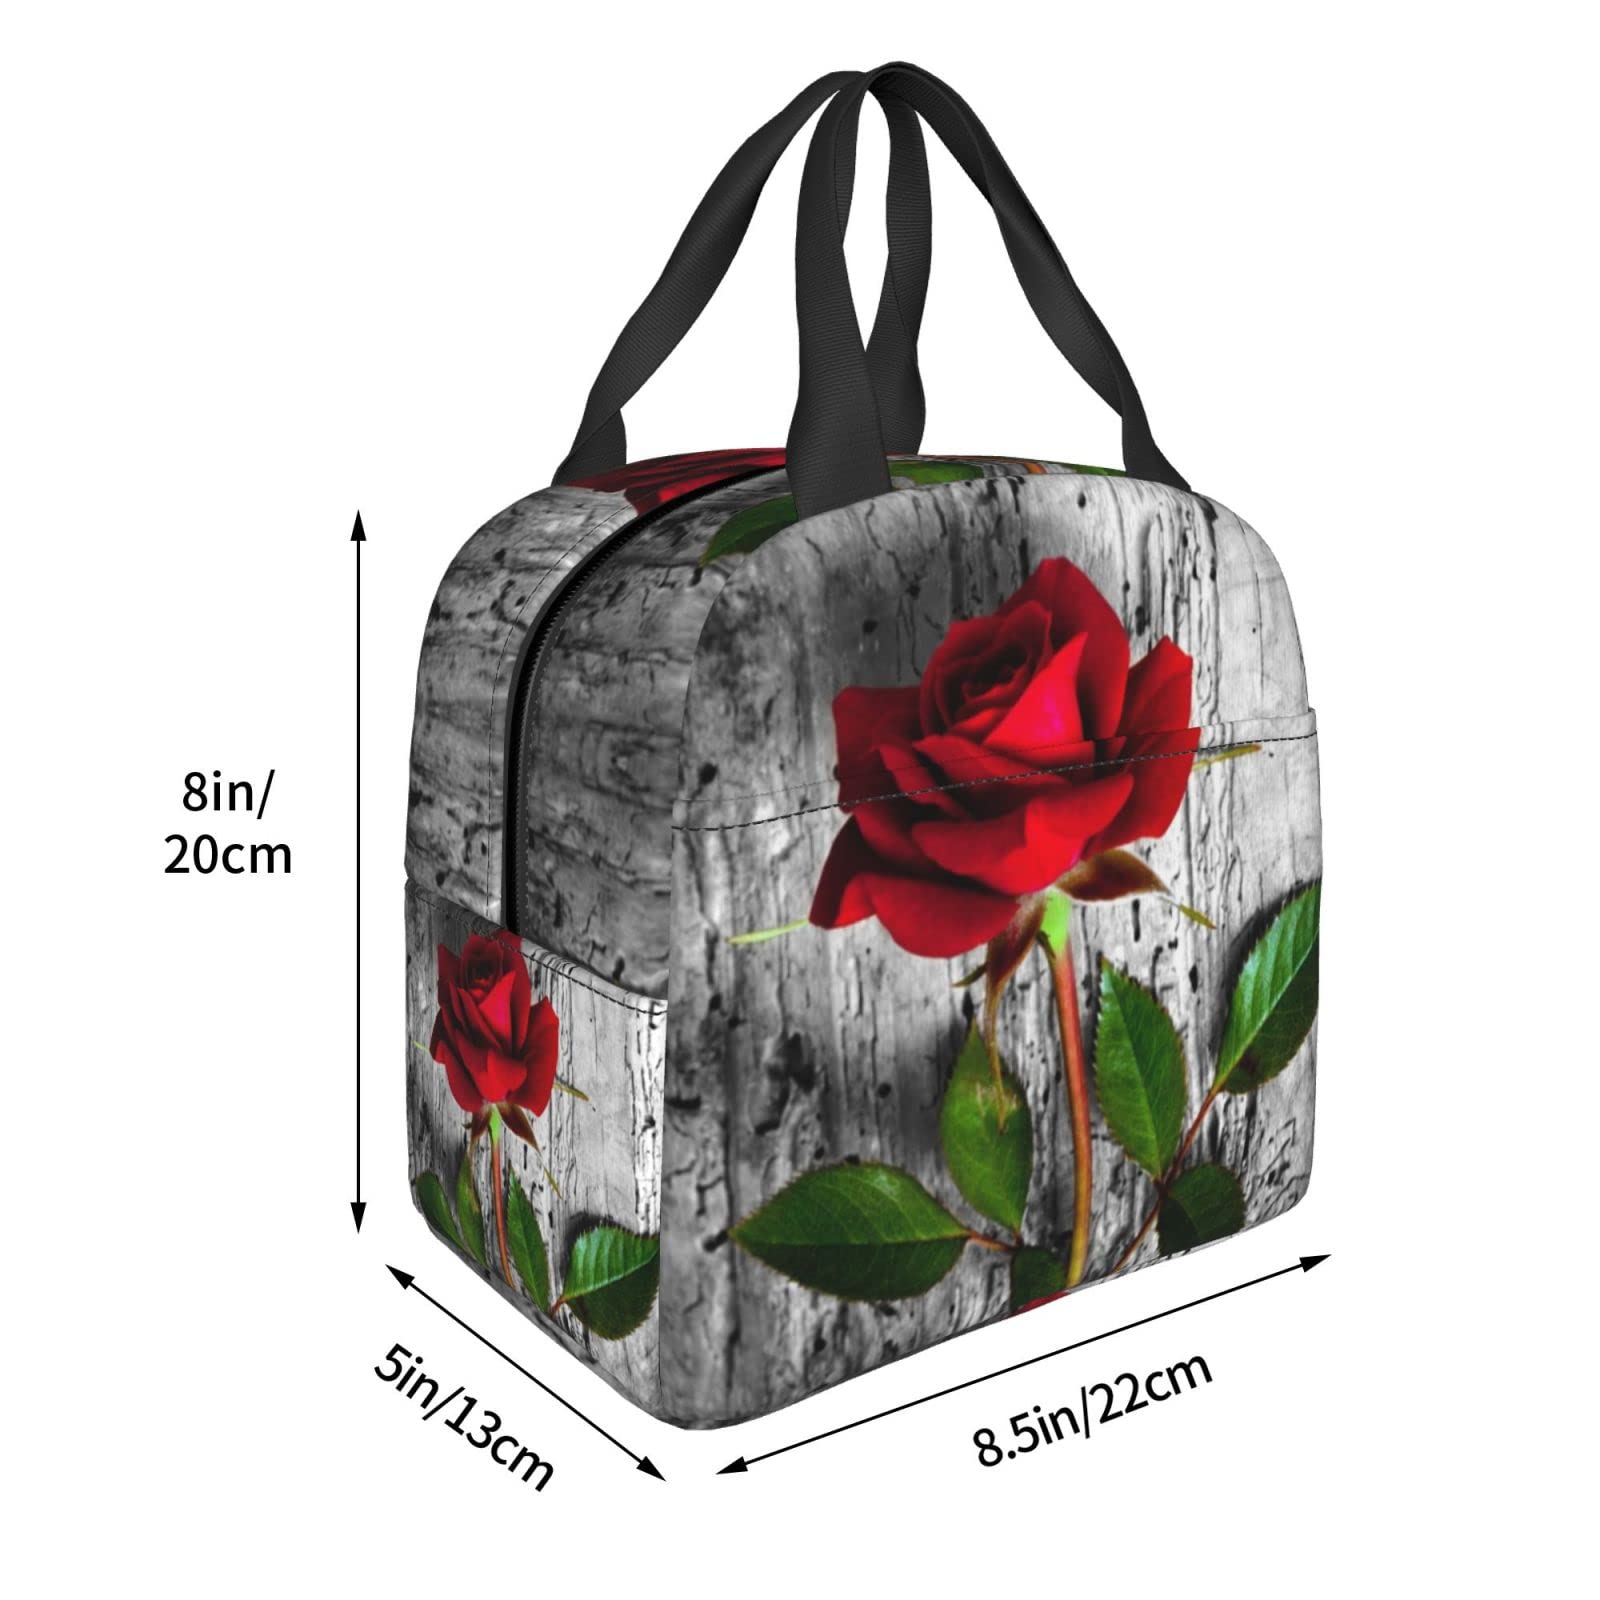 DICITNET Red Rose Lunch Box Reusable Insulated Lunch Bag Ladies Men's Lunch Box Suitable for Camping Office School